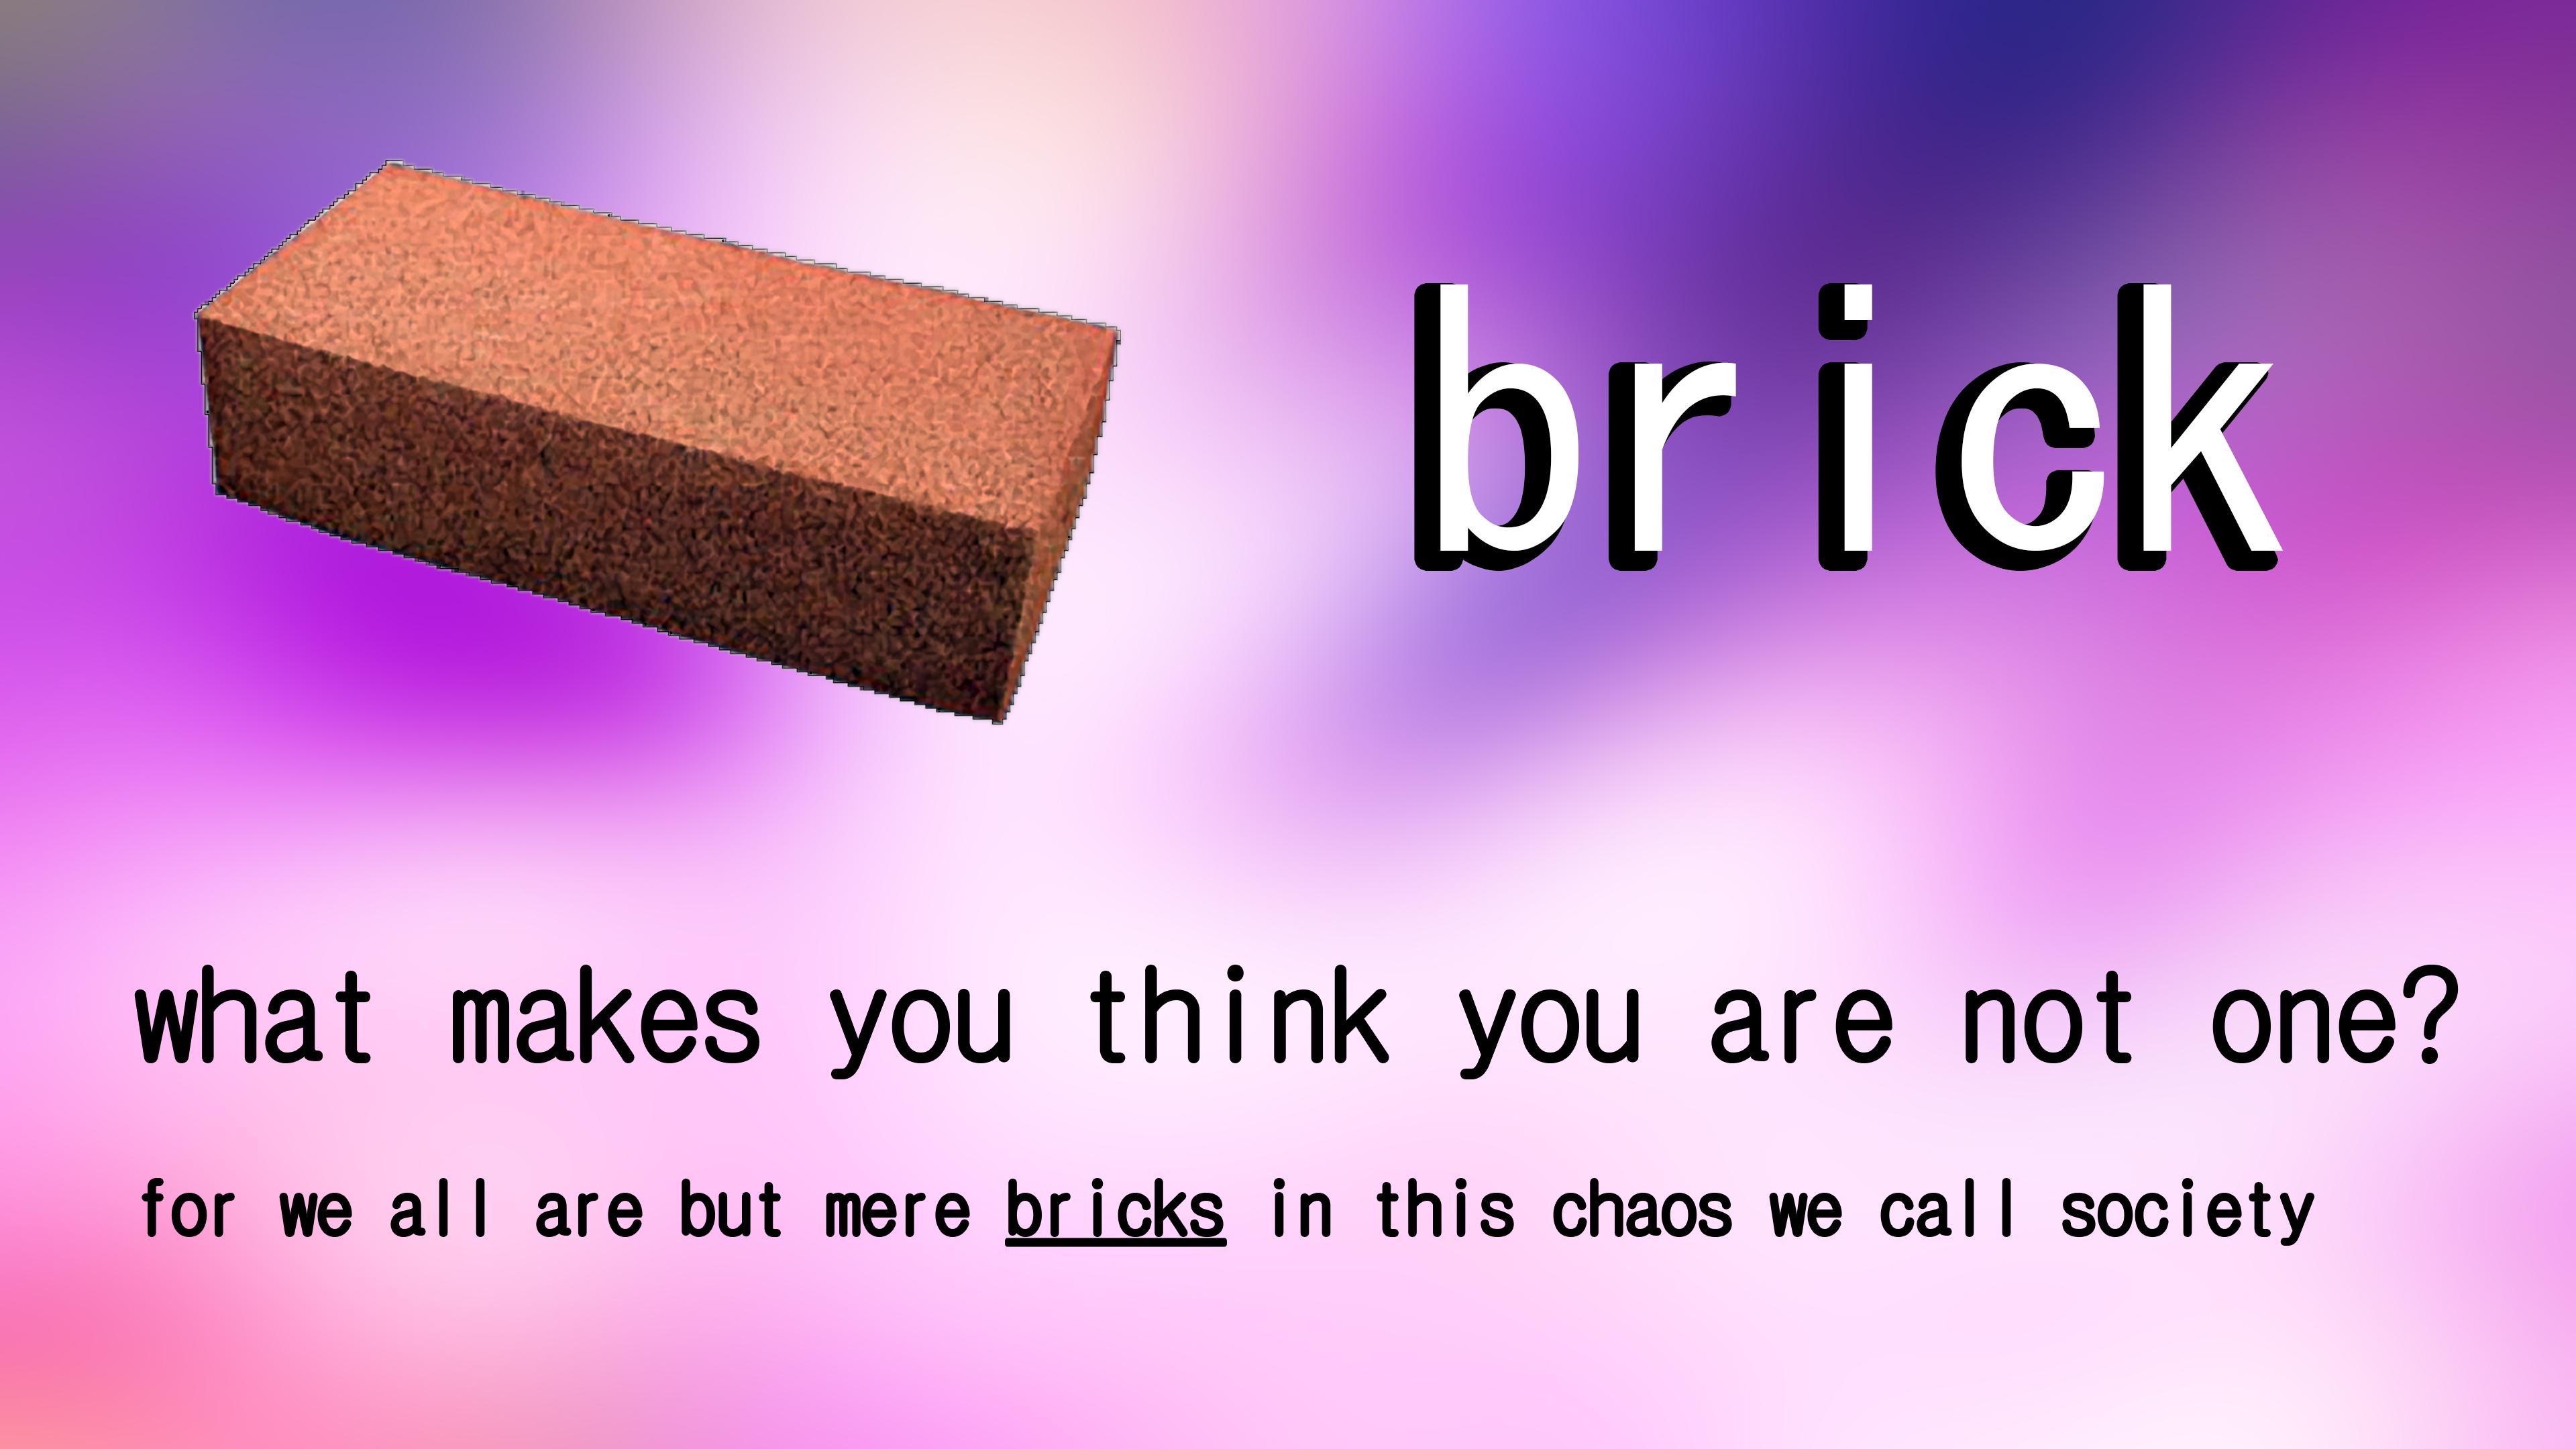 graphics - brick what makes you think you are not one? for we all are but mere bricks in this chaos we call society